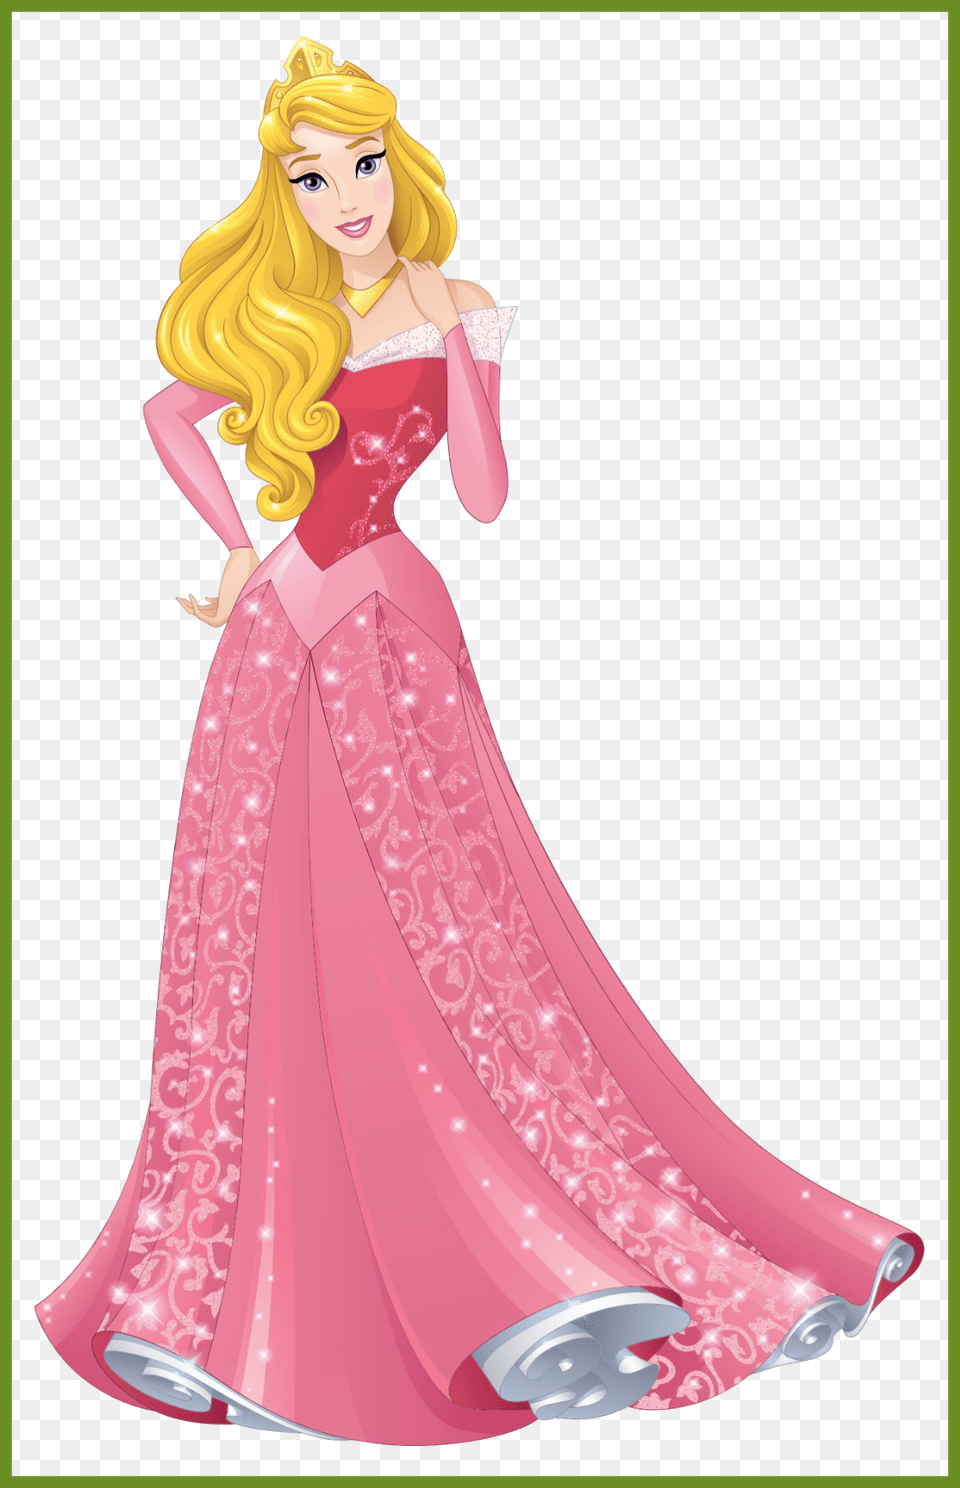 Barbie Images Barbie Girl Images Hd Incredible Nuevo Disney Princess Aurora, Clothing, Gown, Dress, Formal Wear Free Png